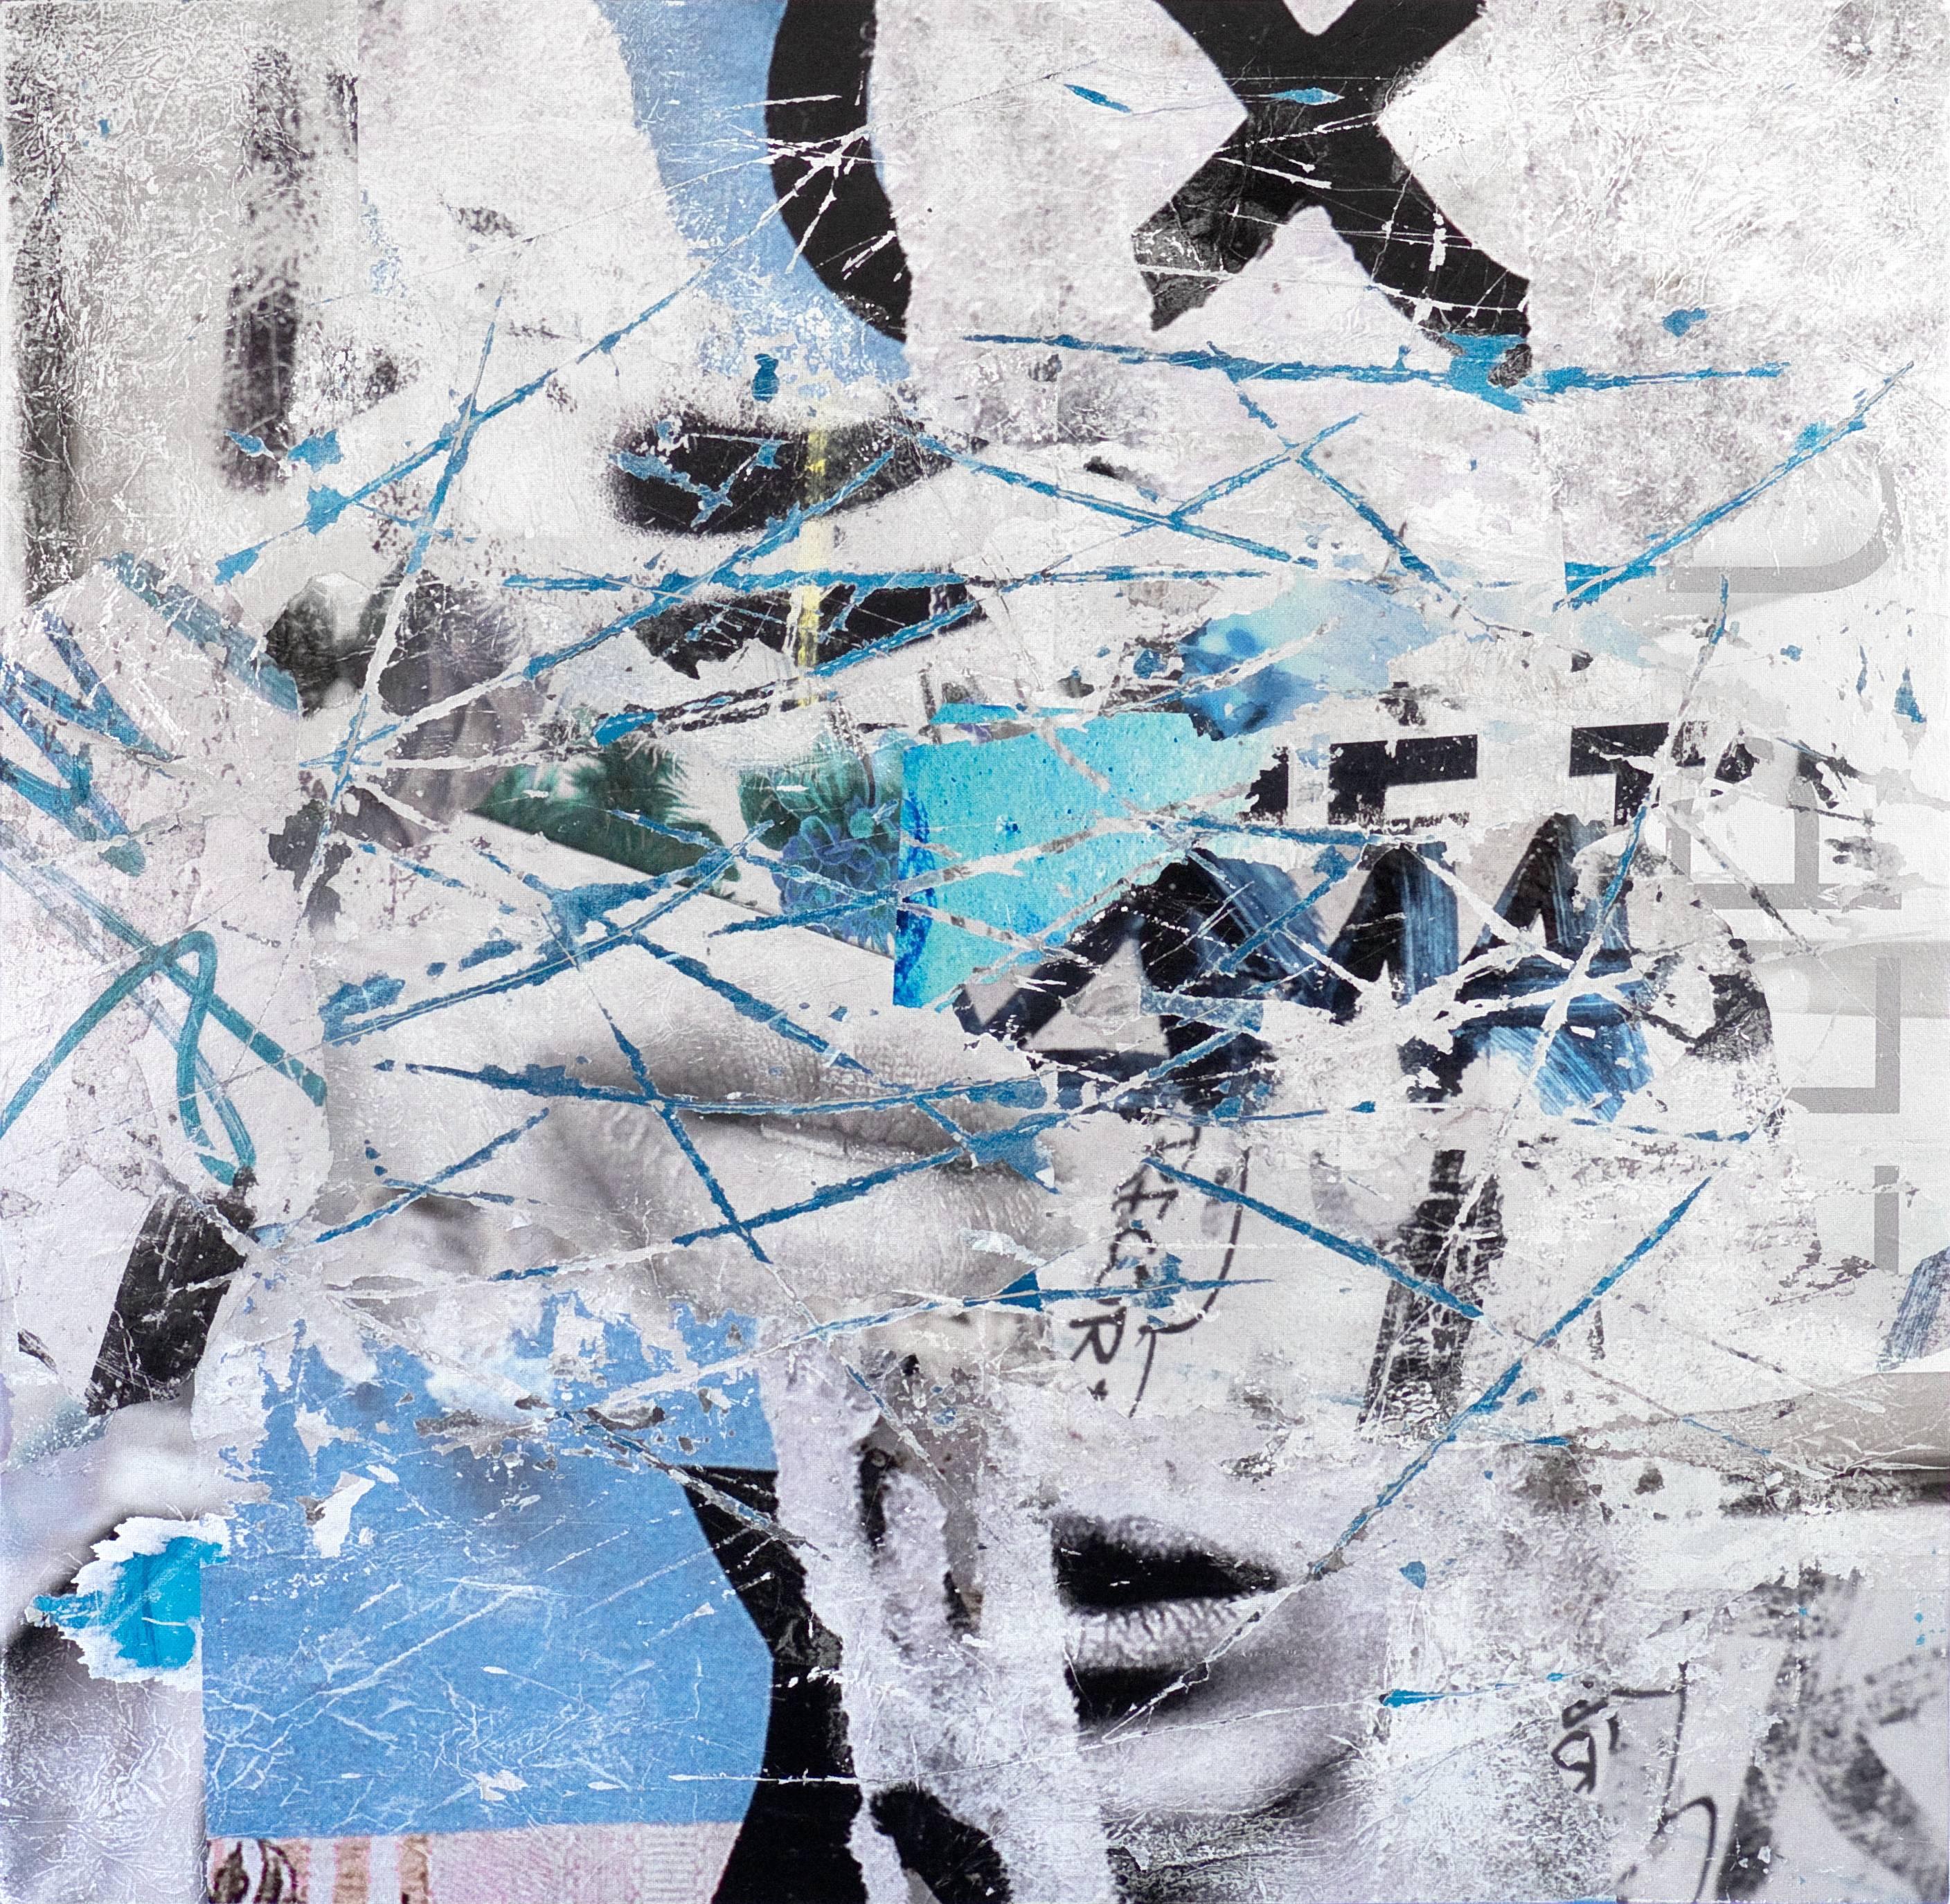 David Fredrik Moussallem Abstract Painting - Cuts and Scrapes #1 - contemporary street art white and blue abstract painting